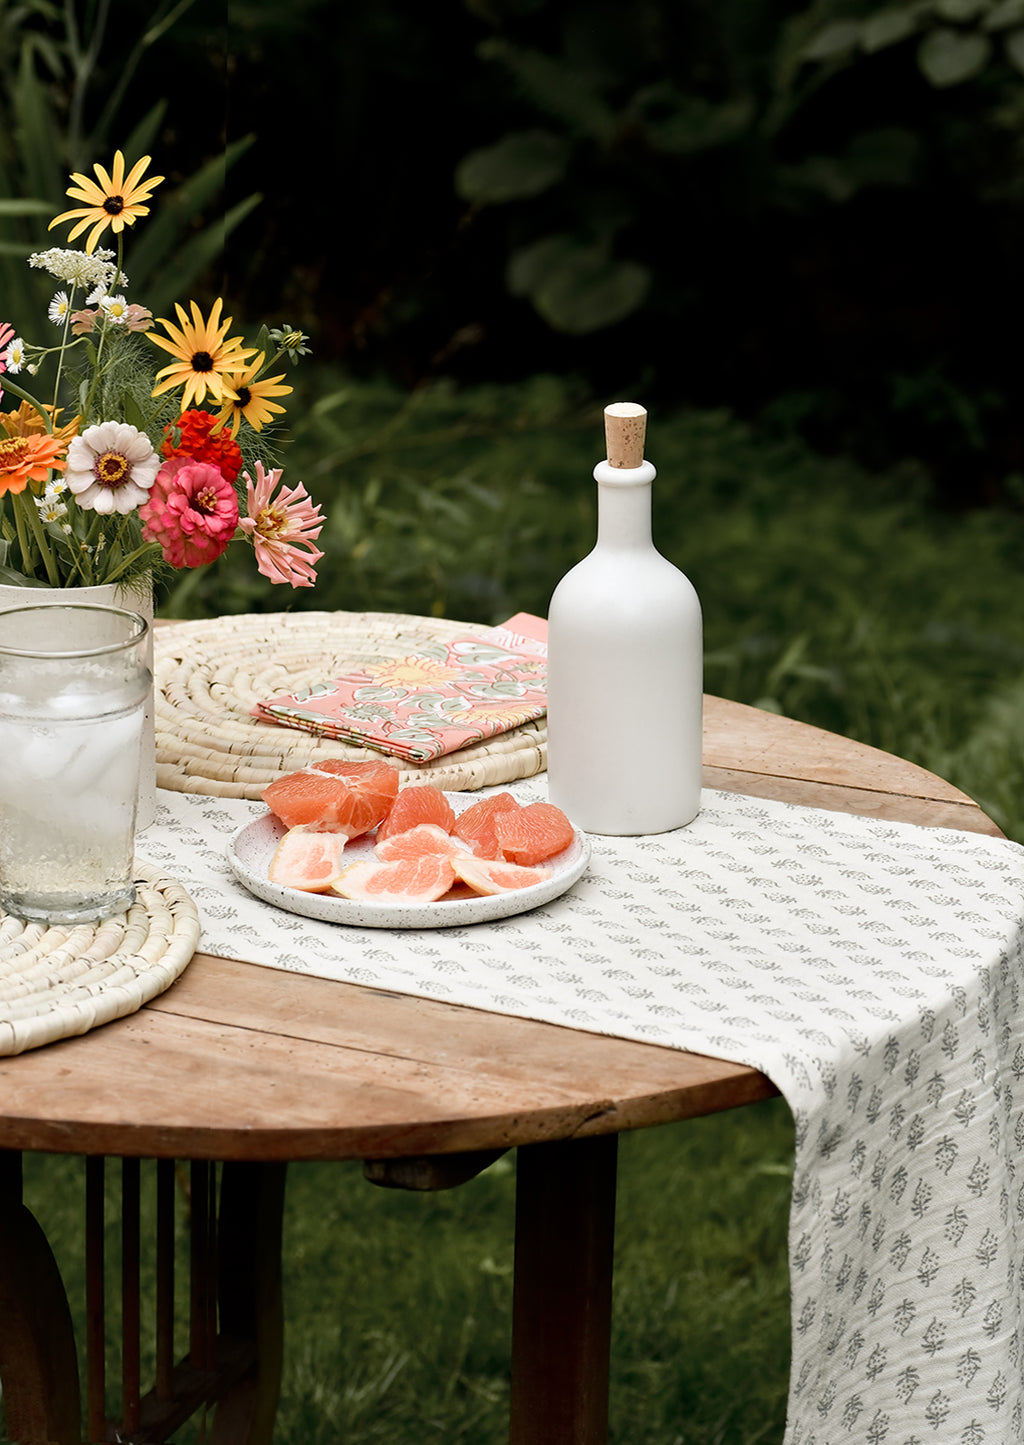 Short / Satin White: An outdoor table setting with grapefruit and flowers.